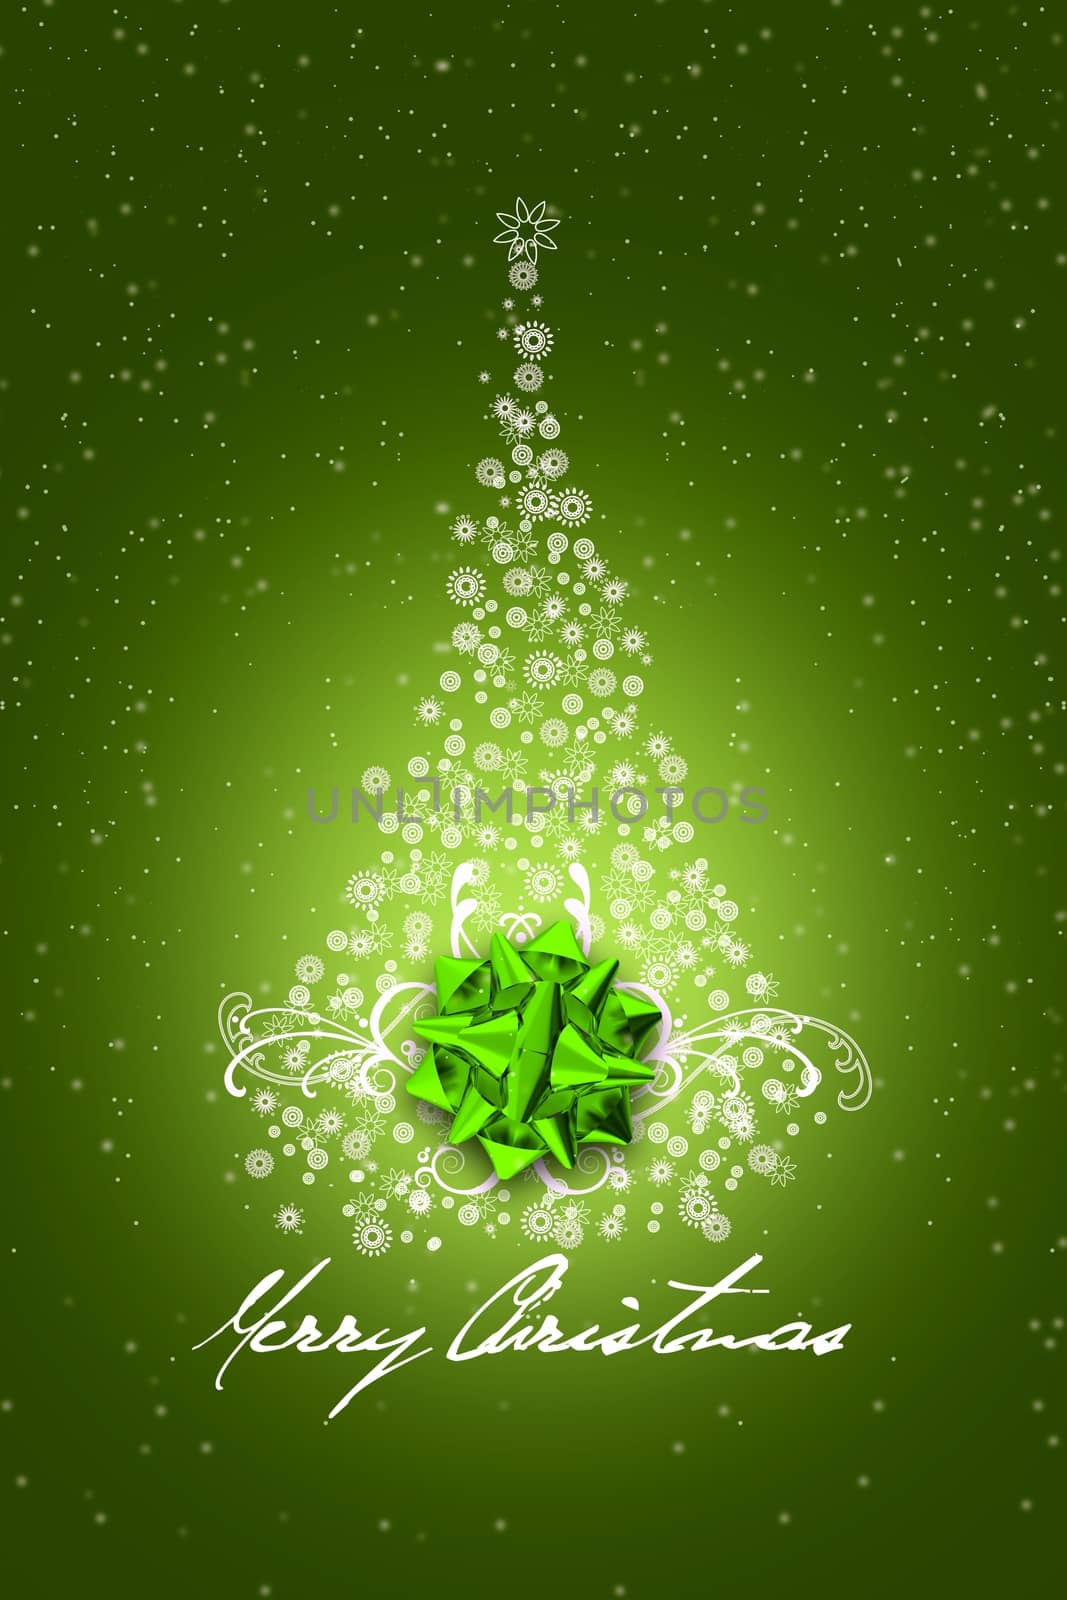 Green Christmas Design by welcomia